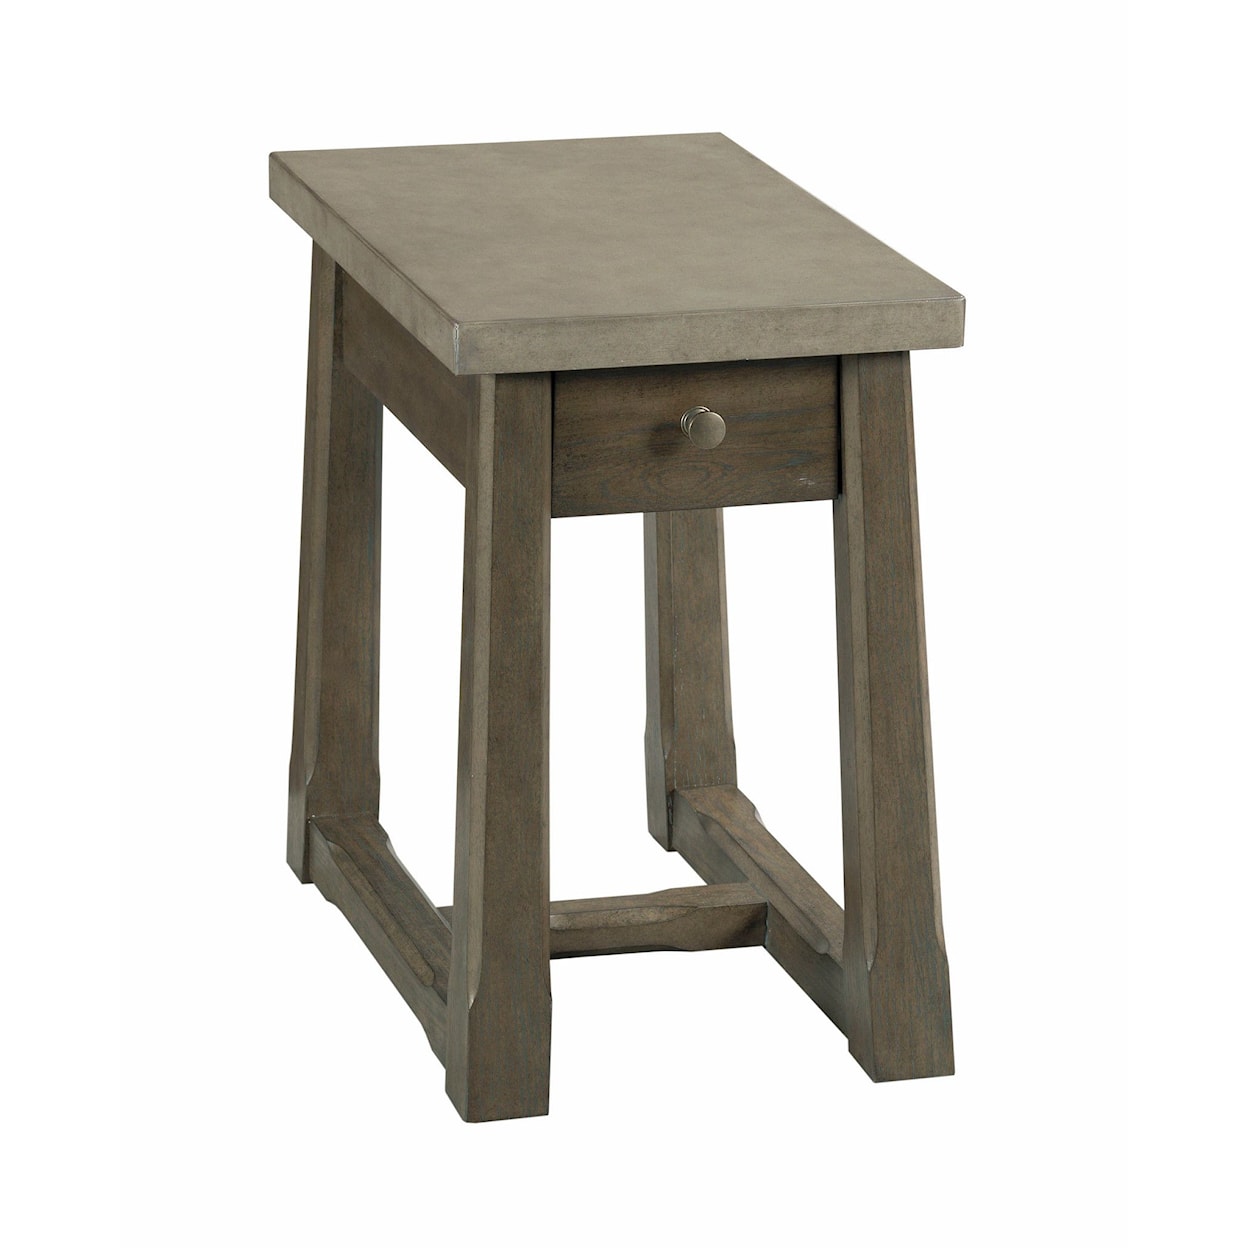 Hammary Torres Chairside Table